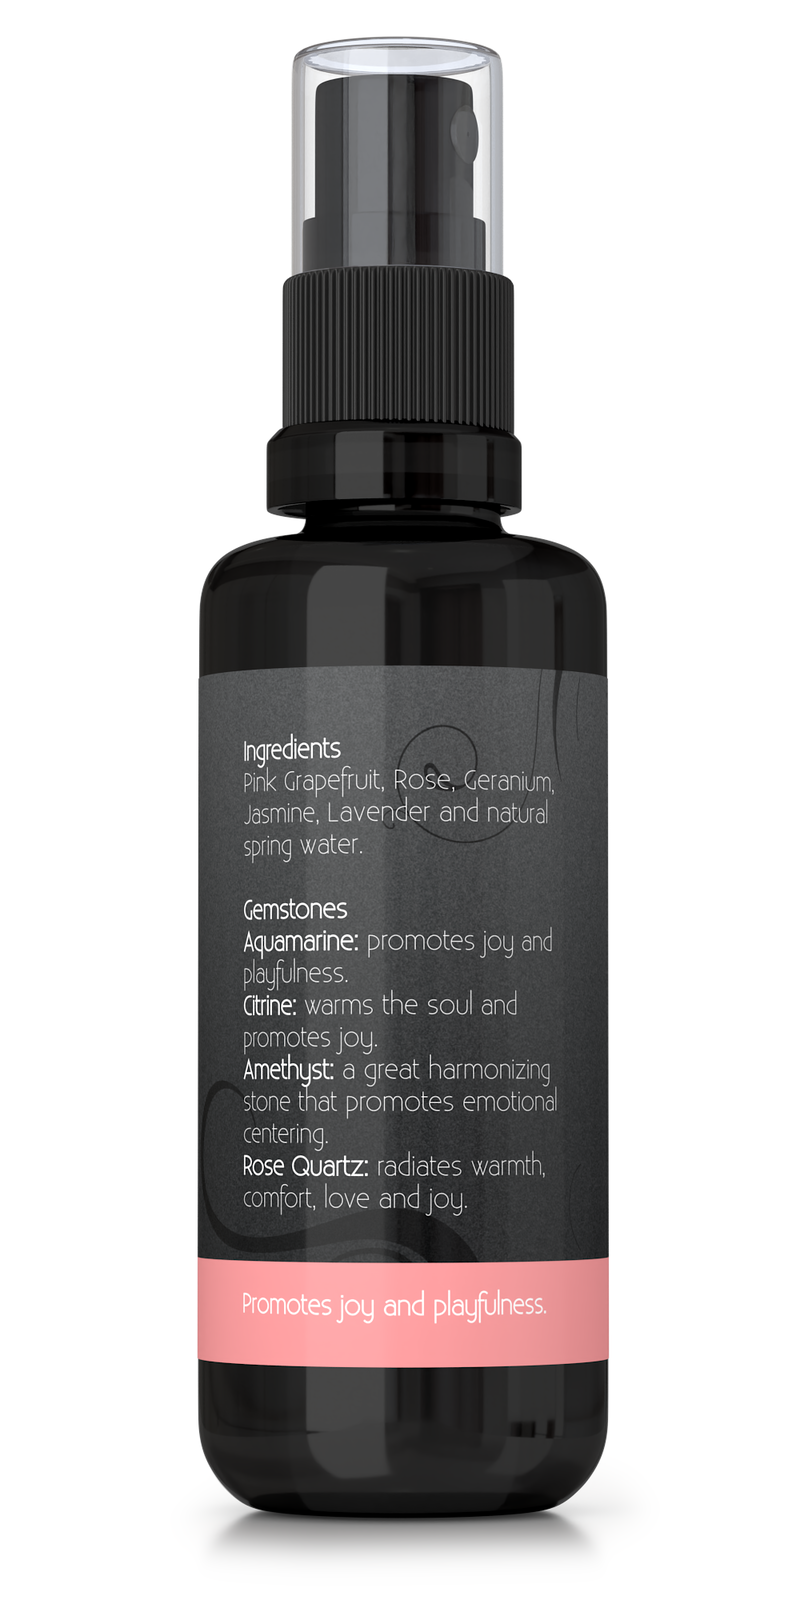 Joy aromatherapy spray with essential oils and gemstones, backside of bottle showing ingredients